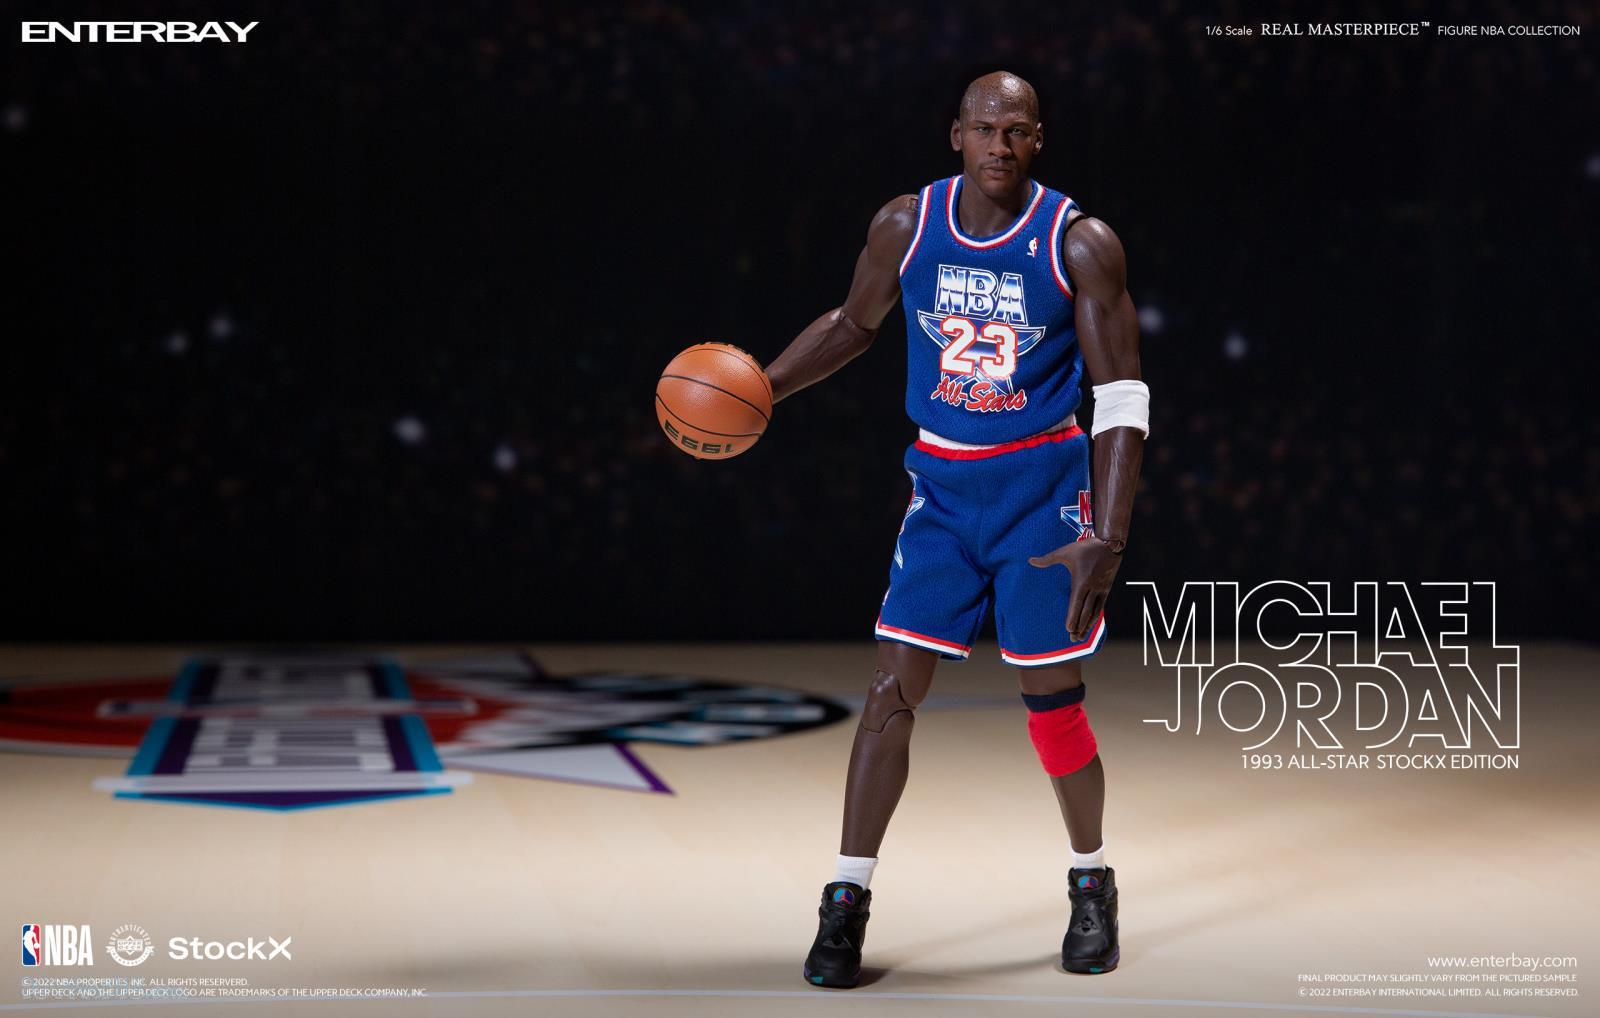 NEW PRODUCT: Enterbay - Real Masterpiece NBA Collection Michael Jordan All Star 1993 Edition 0579